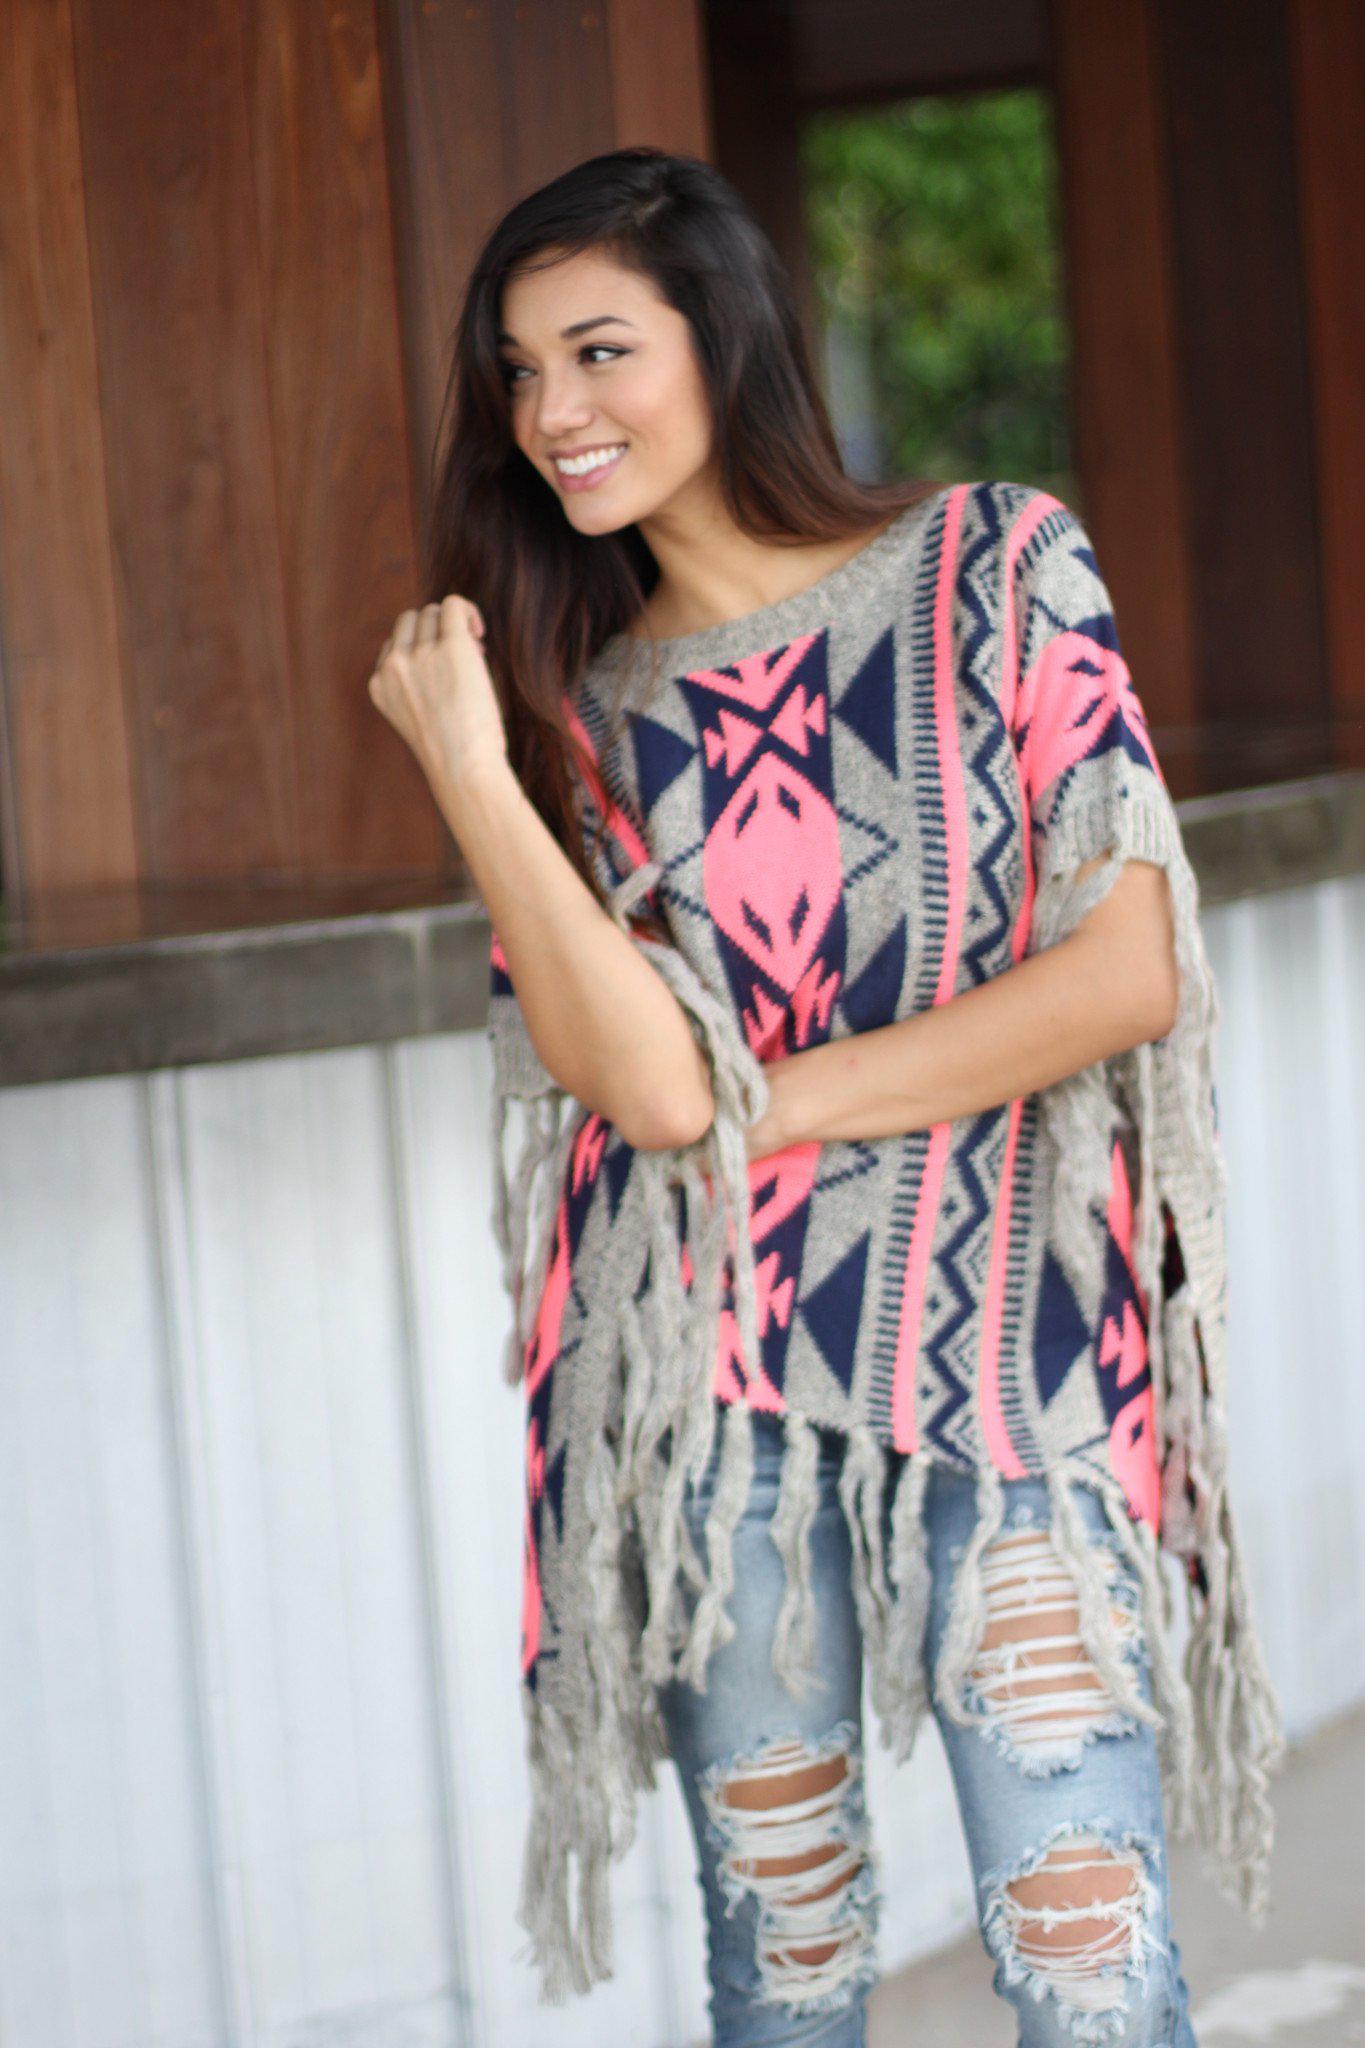 Neon Pink and Gray Poncho Sweater